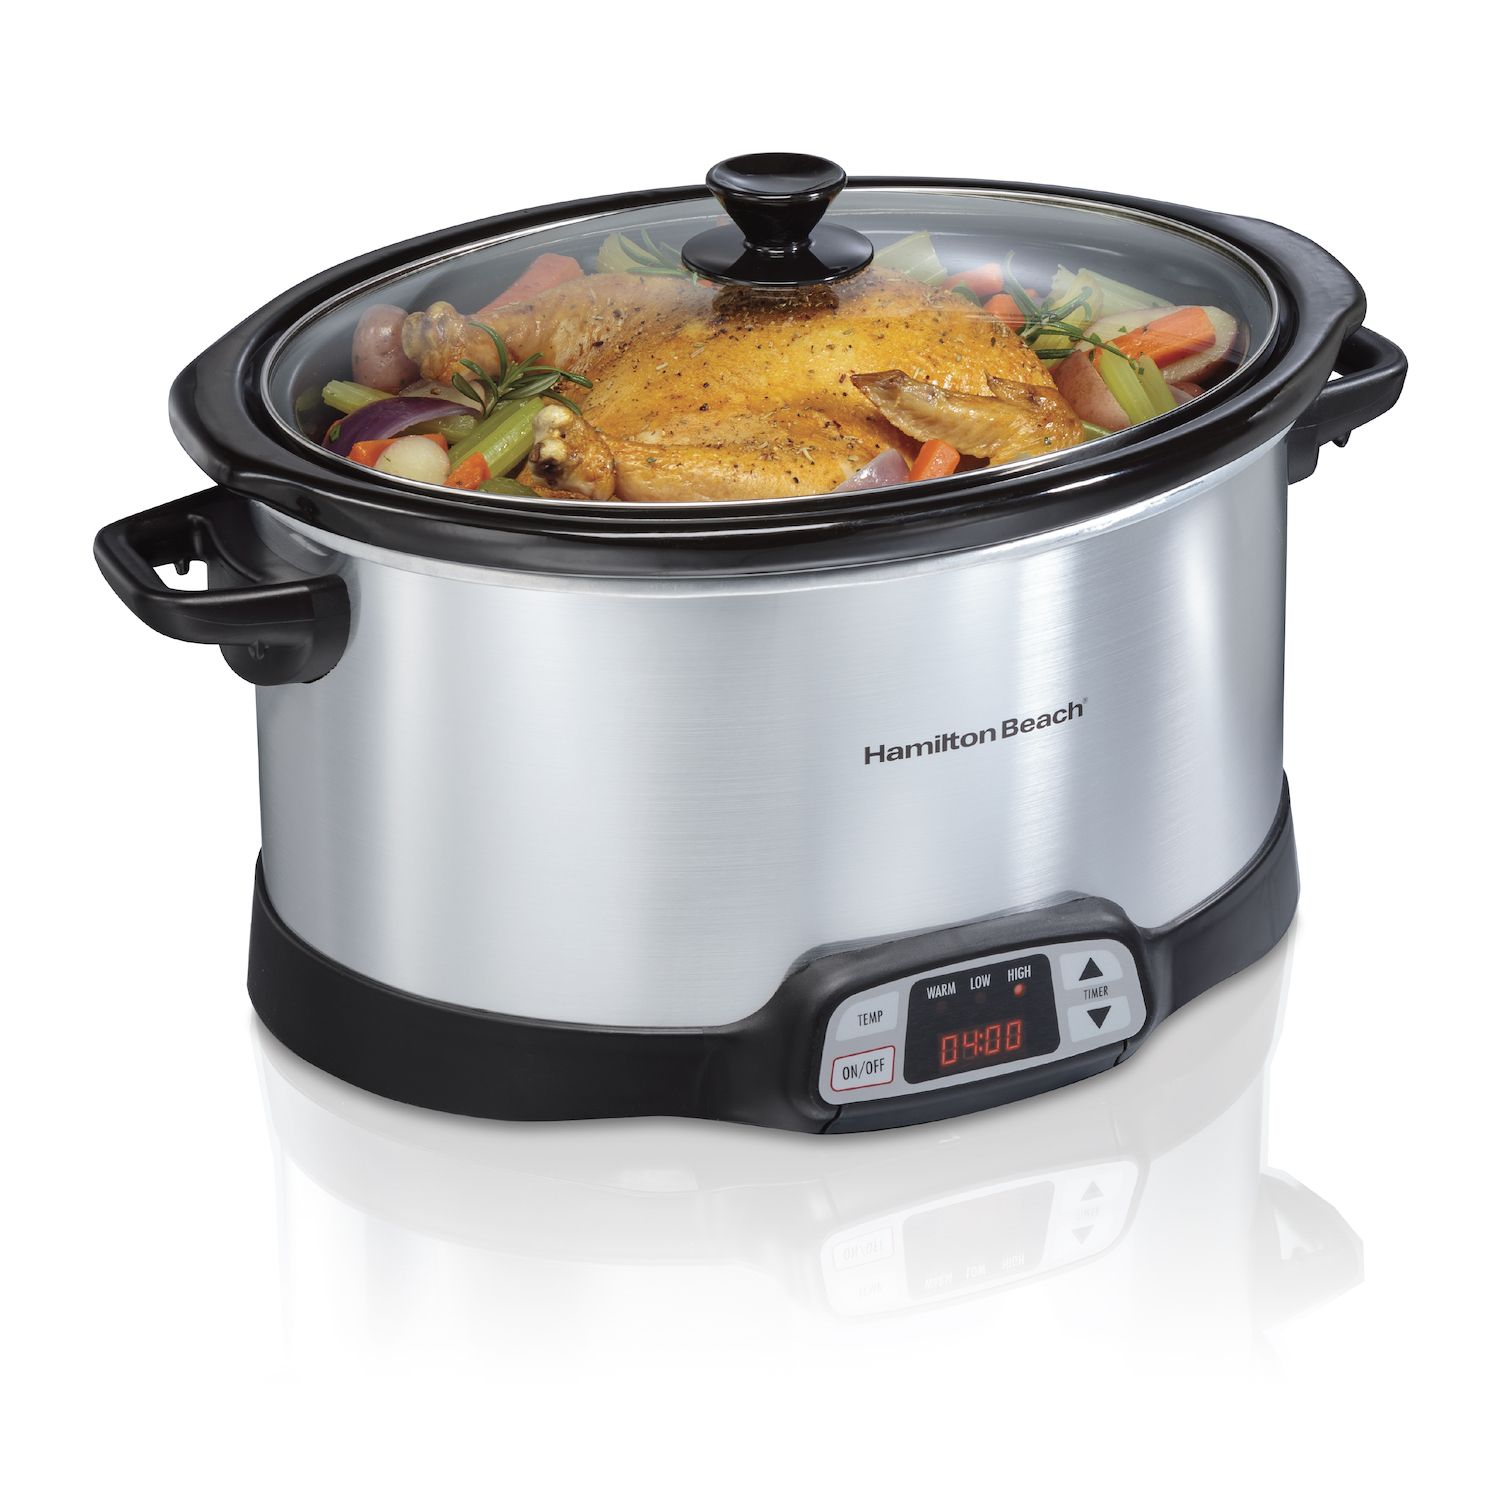 Magnifique 4-Quart Casserole Manual Slow Cooker with Keep Warm Setting - Perfect Kitchen Small Appliance for Family Dinners